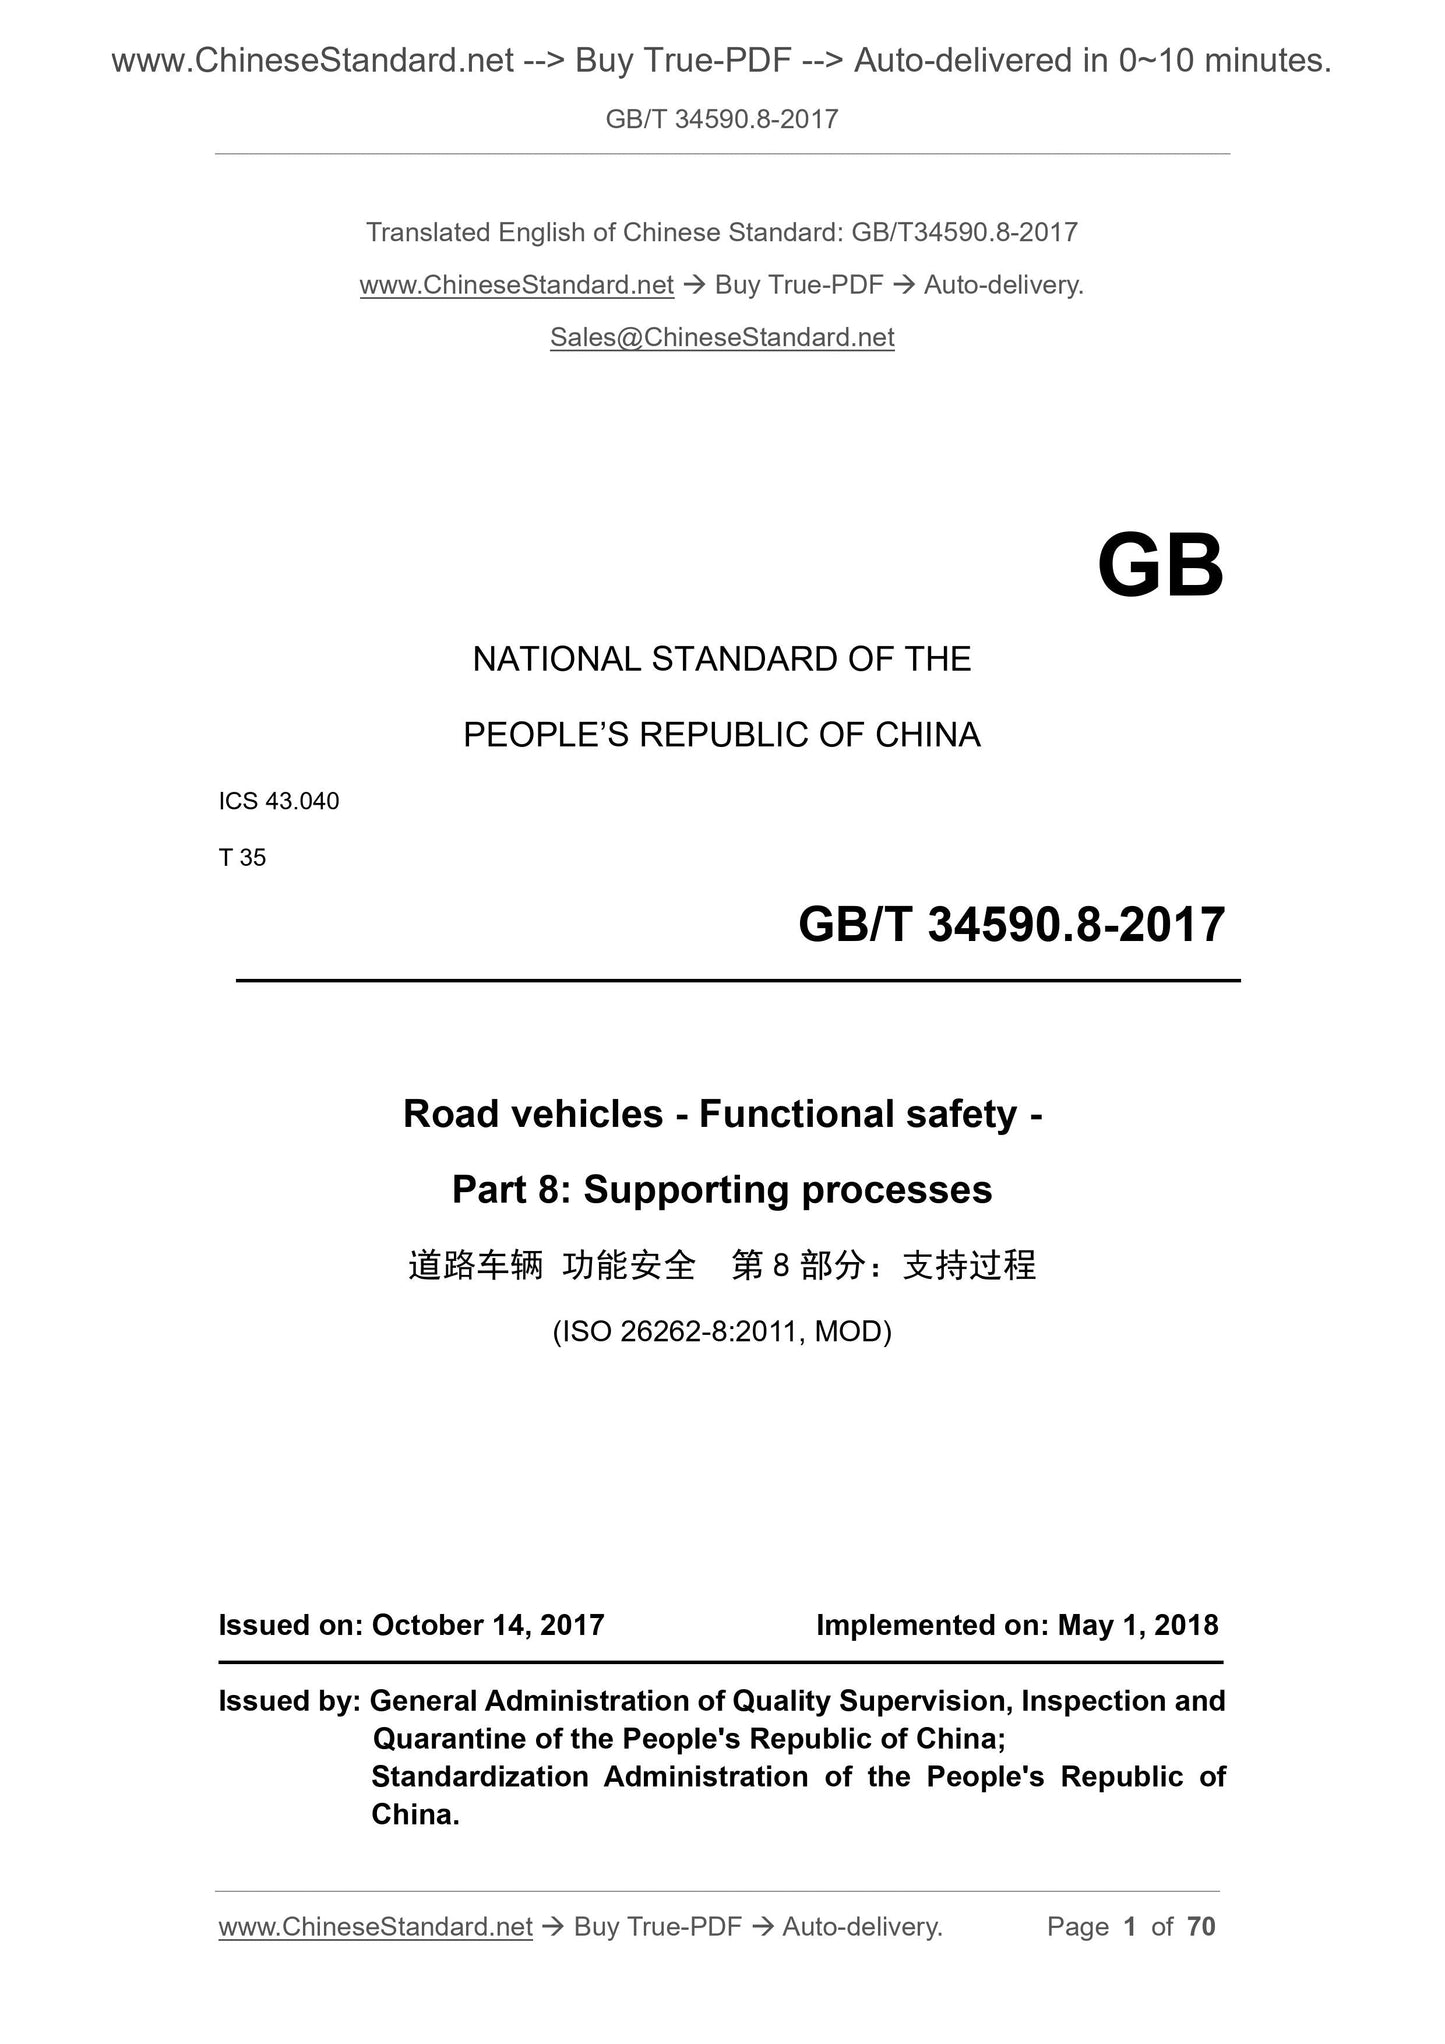 GB/T 34590.8-2017 Page 1